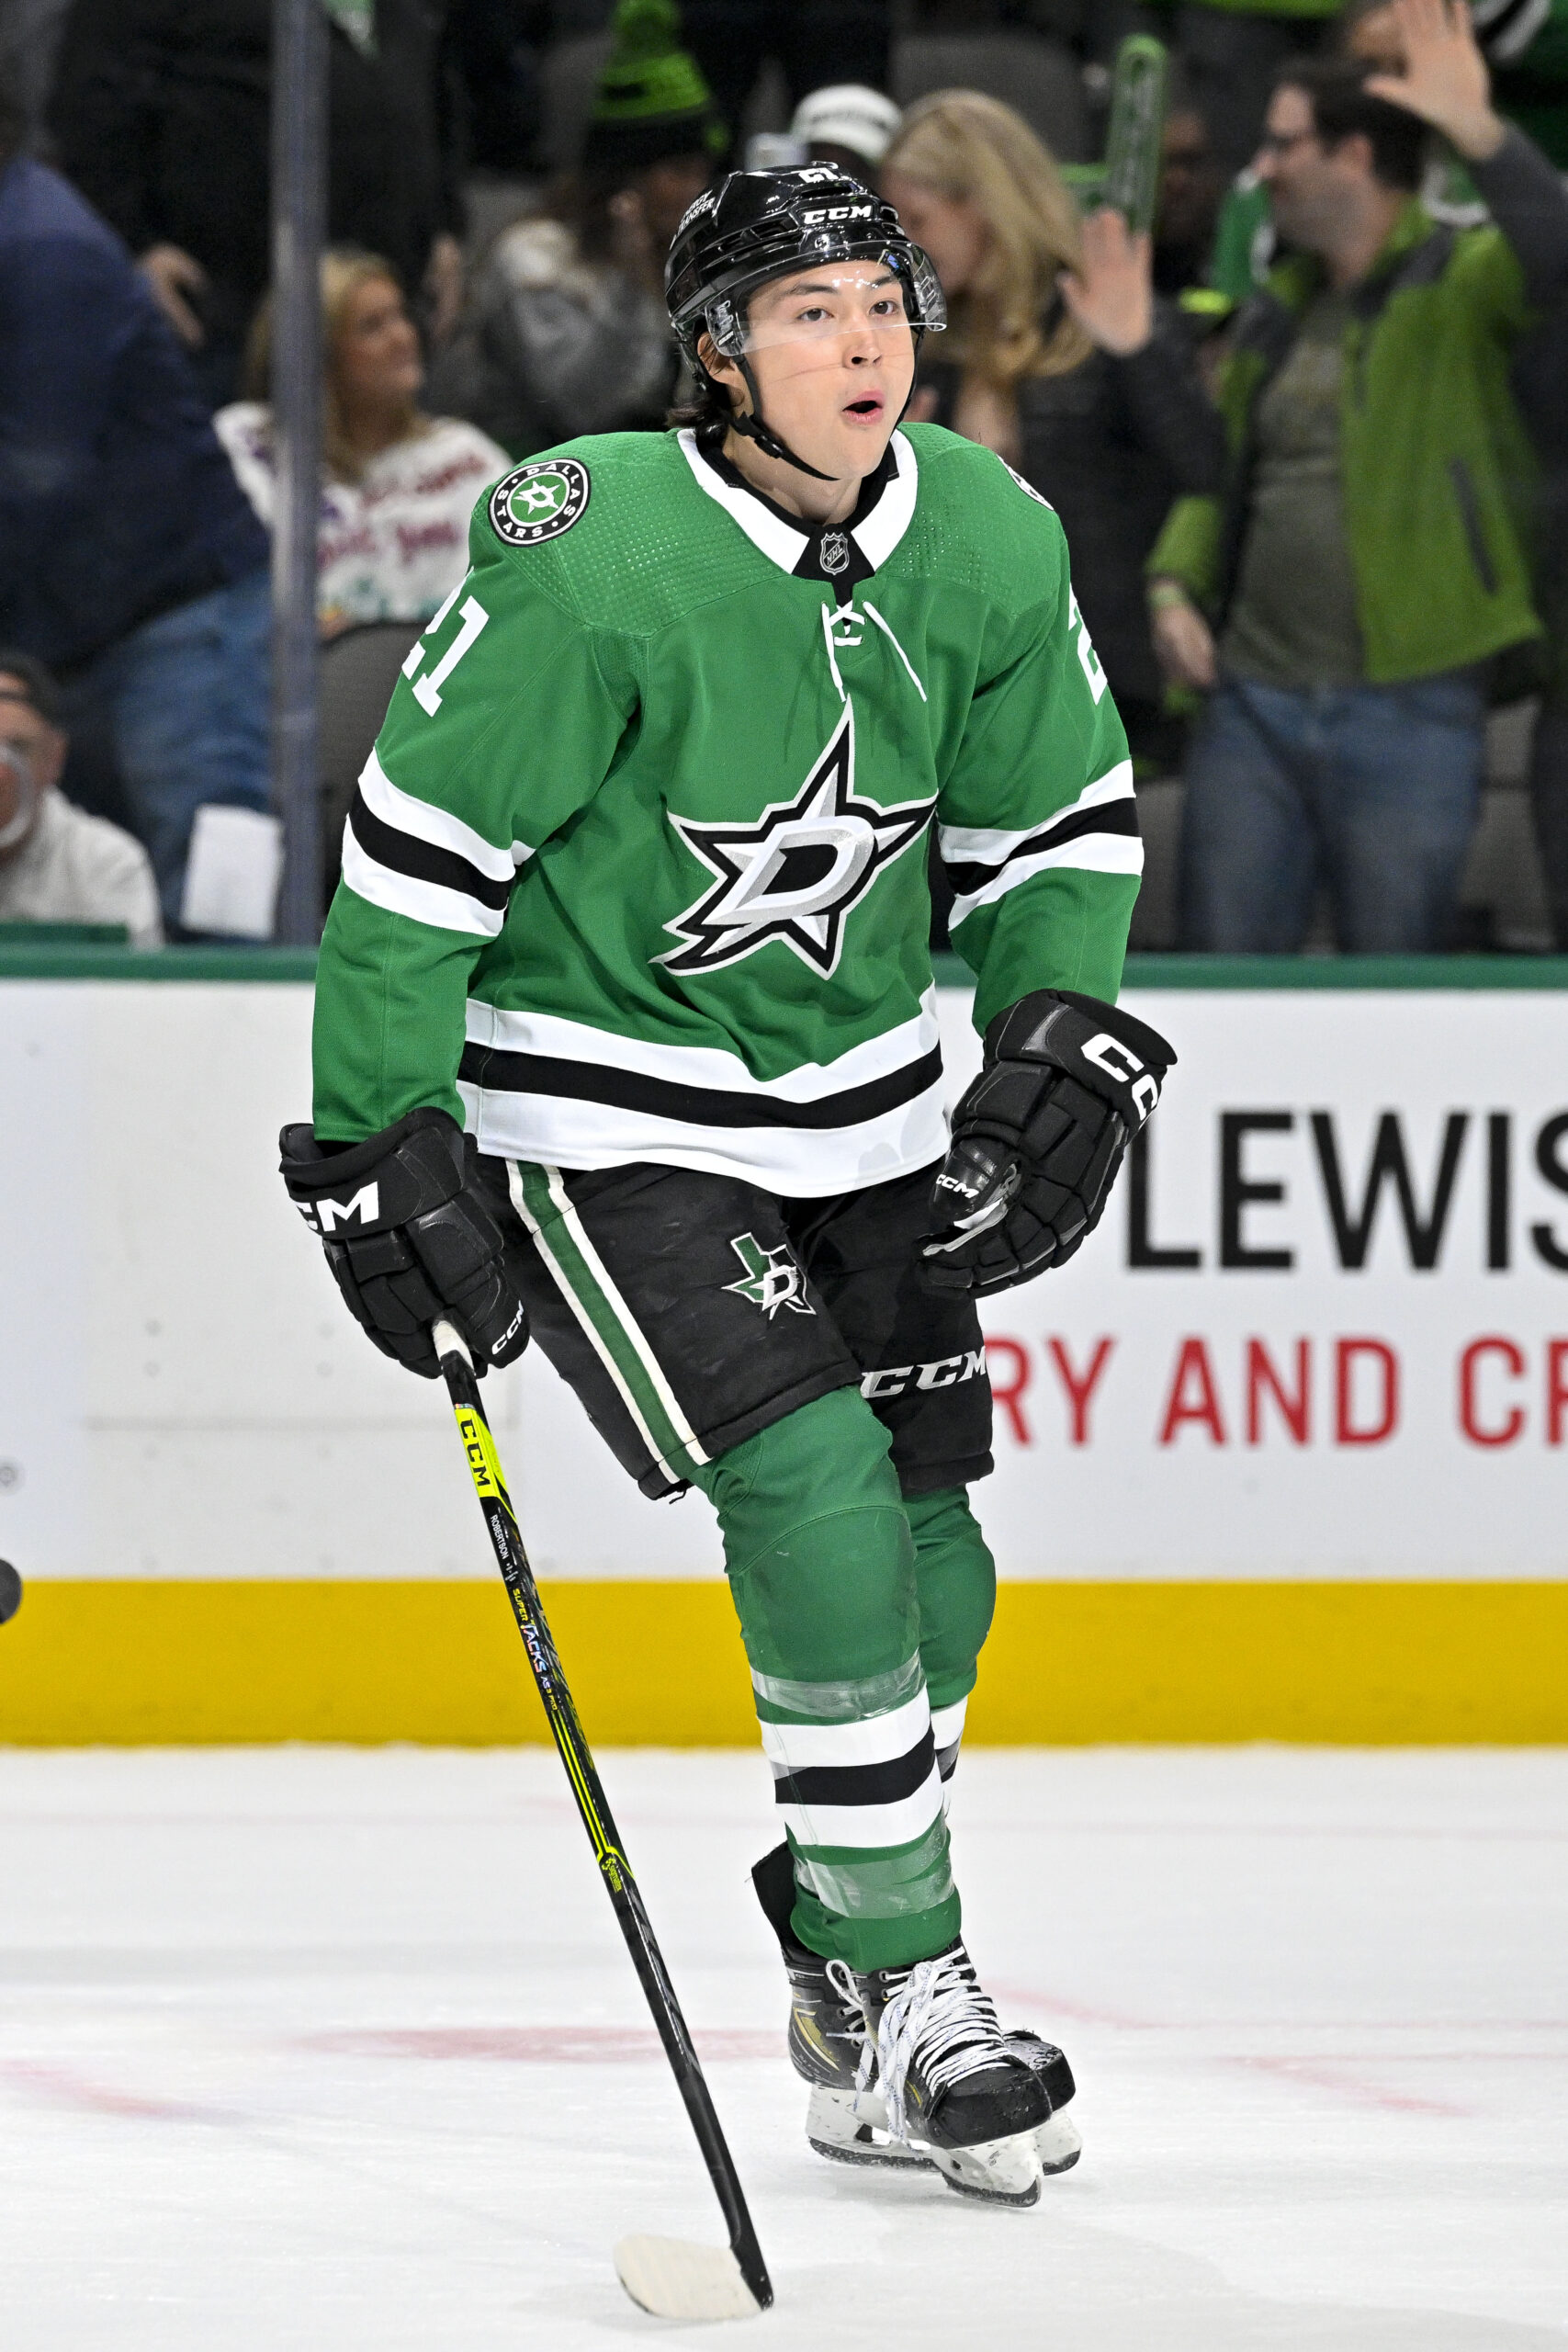 Dallas Stars en X: With his goal against the Oilers, Jason